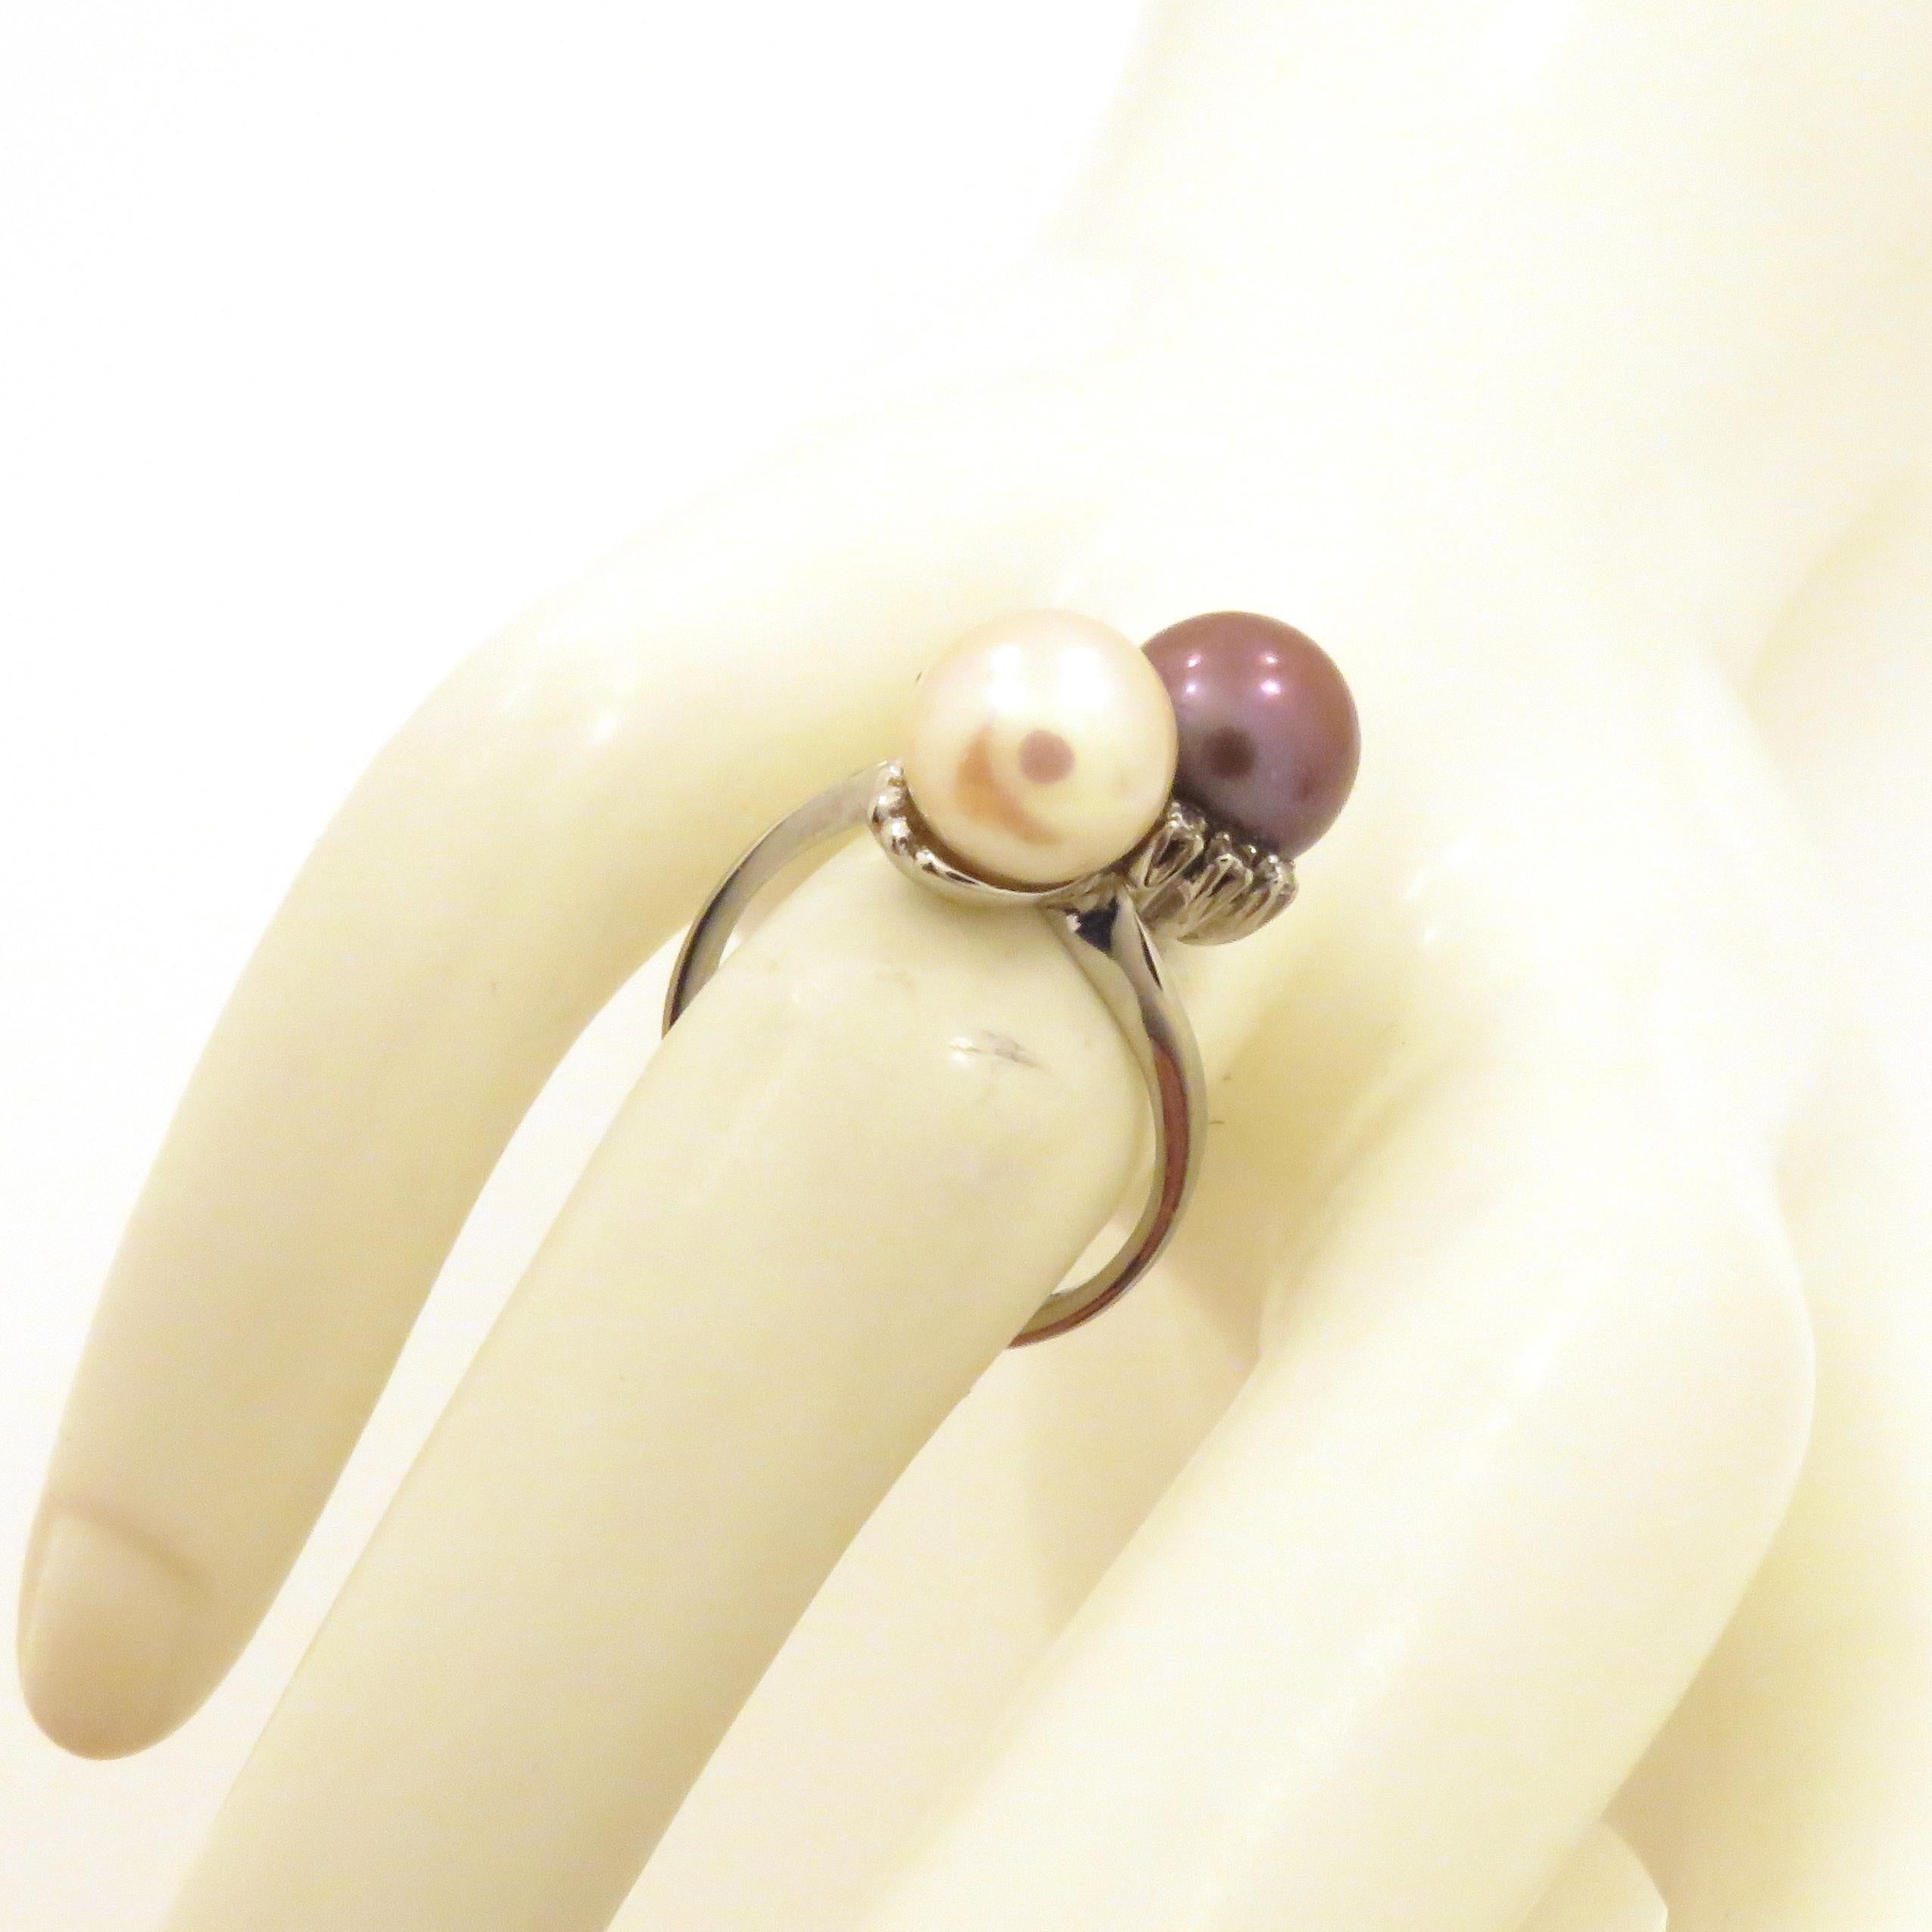 Antique ring in 18 karat white gold with grey  pearl< and white pearl surrounded by 6 natural brilliant cut white diamonds, weighting 0.06 carats total. US finger size is 6, French size 52, Italian size 12, it can be resized to the customer's size